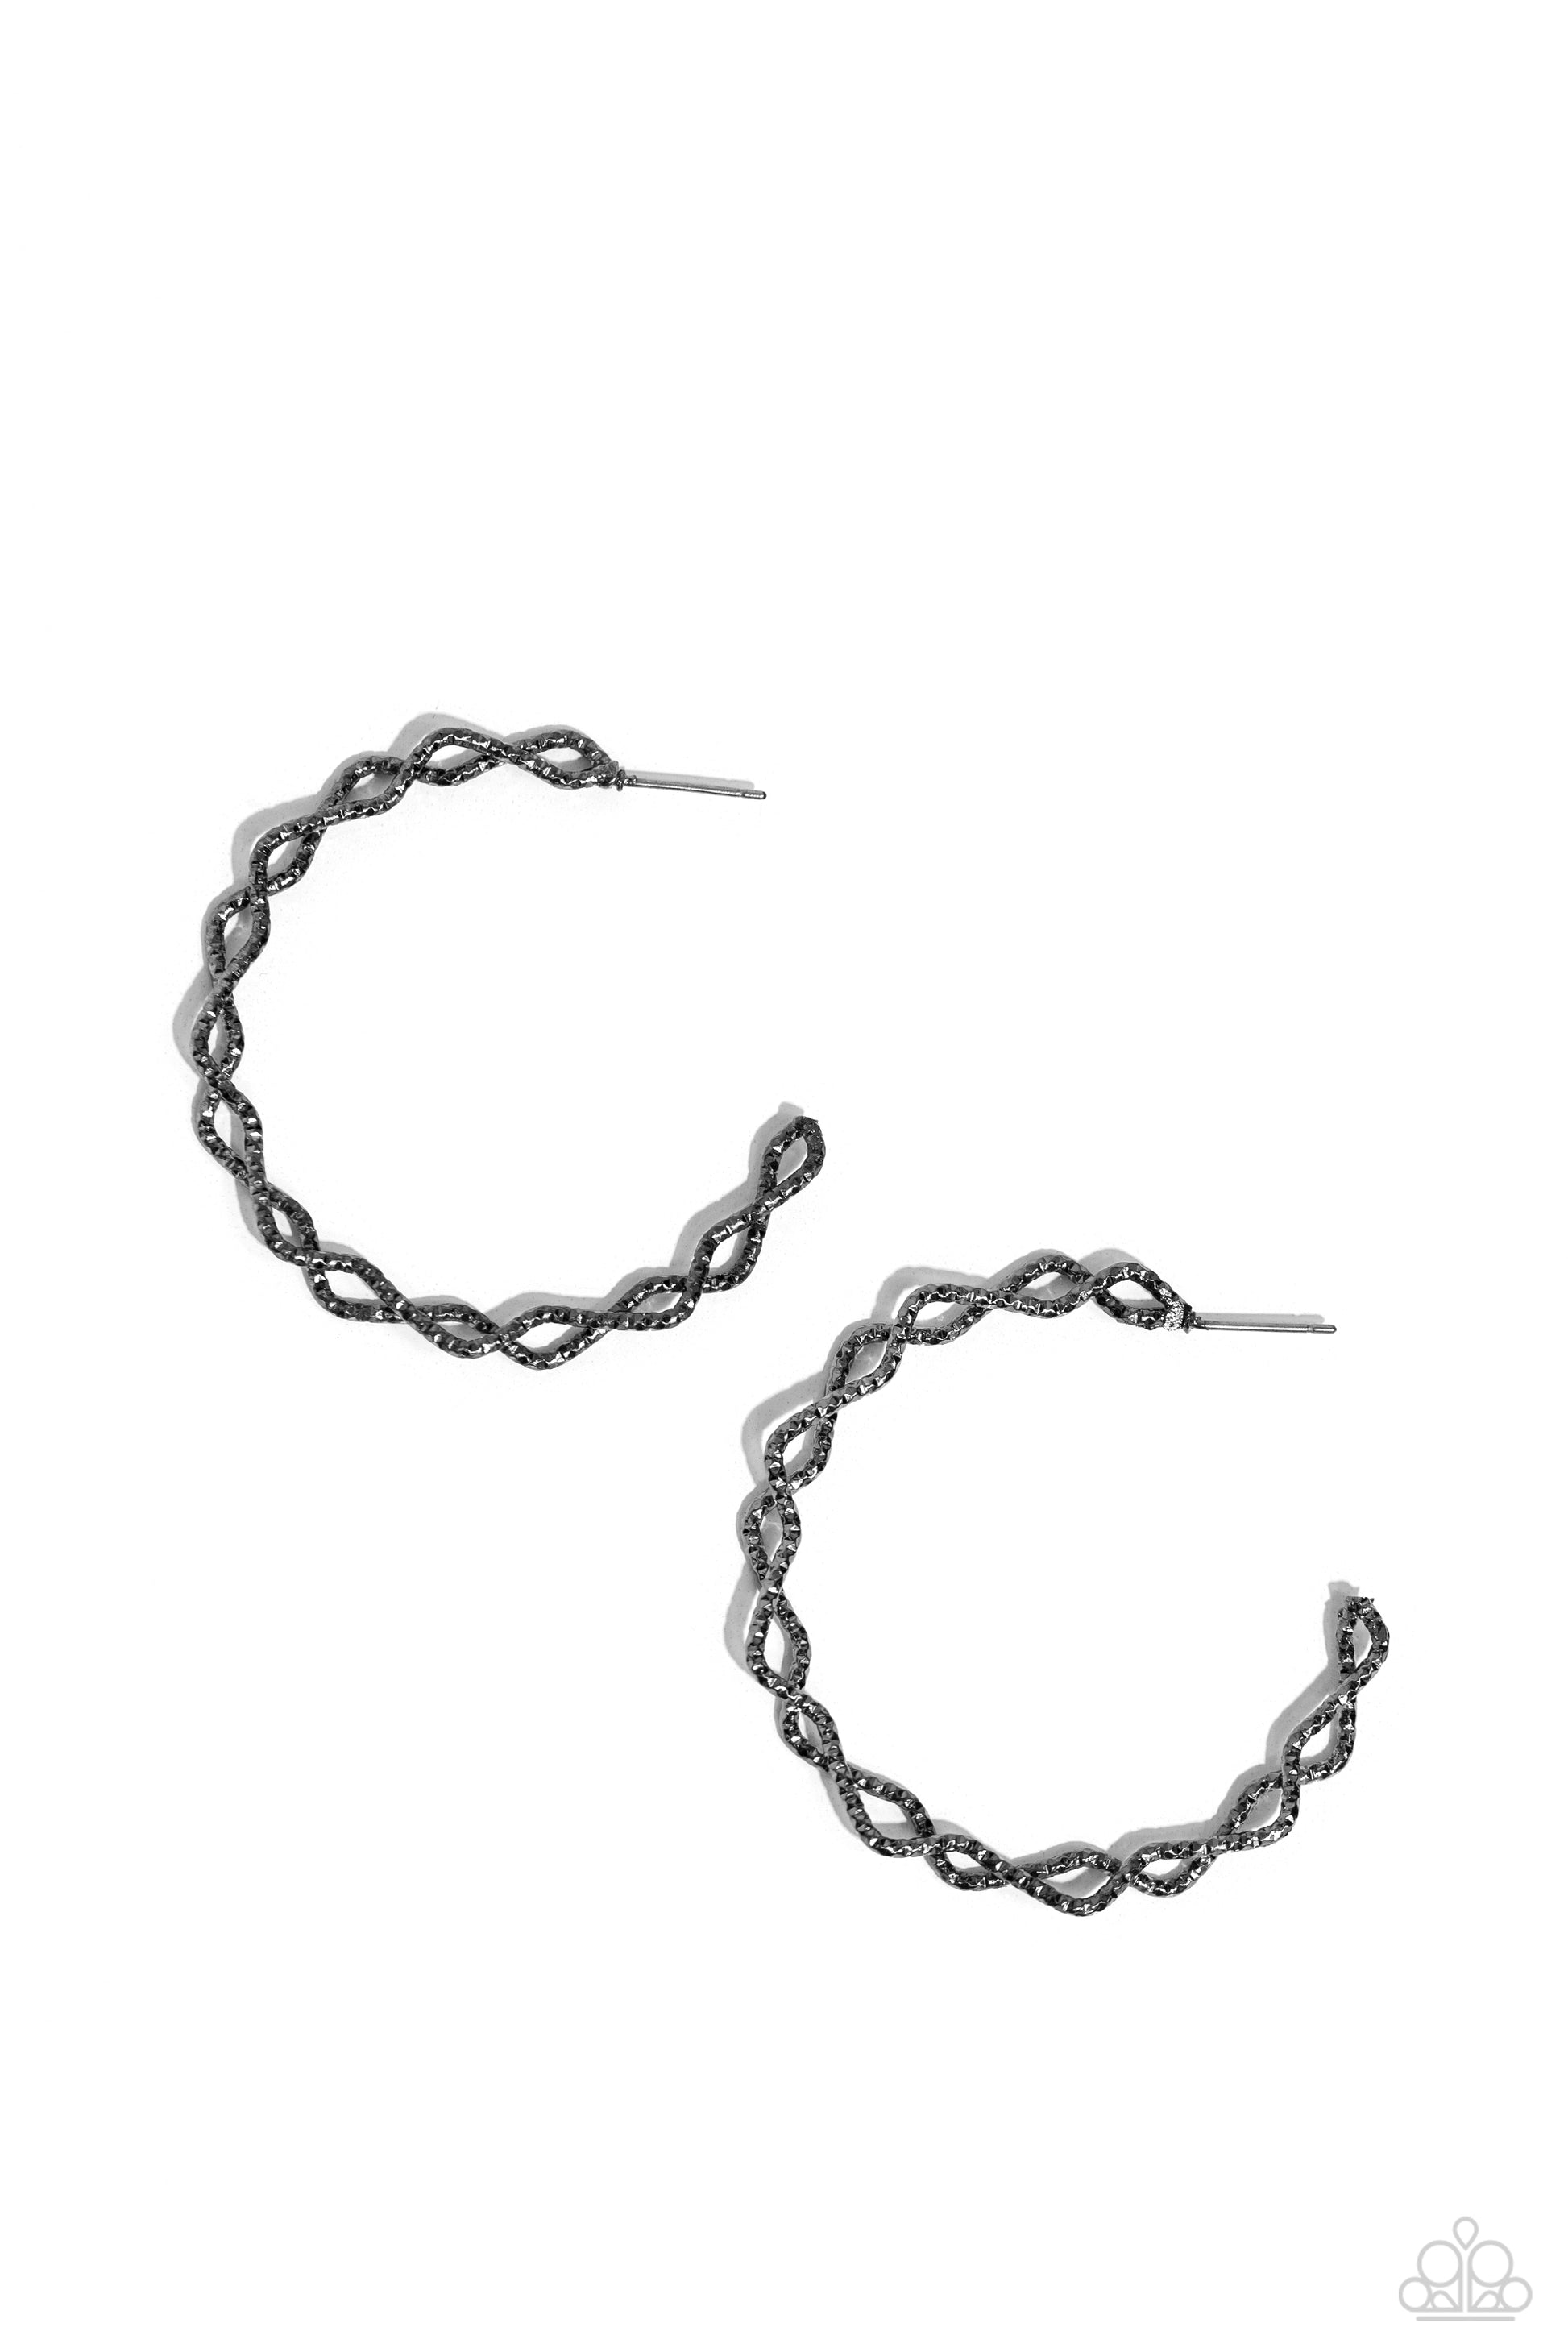 Haute Helix Black Hoop Earring - Paparazzi Accessories  Textured gunmetal bars delicately twist into a glistening helix, creating an edgy oversized hoop. Earring attaches to a standard post fitting. Hoop measures approximately 2" in diameter.  Sold as one pair of hoop earrings.  P5HO-BKXX-217XX